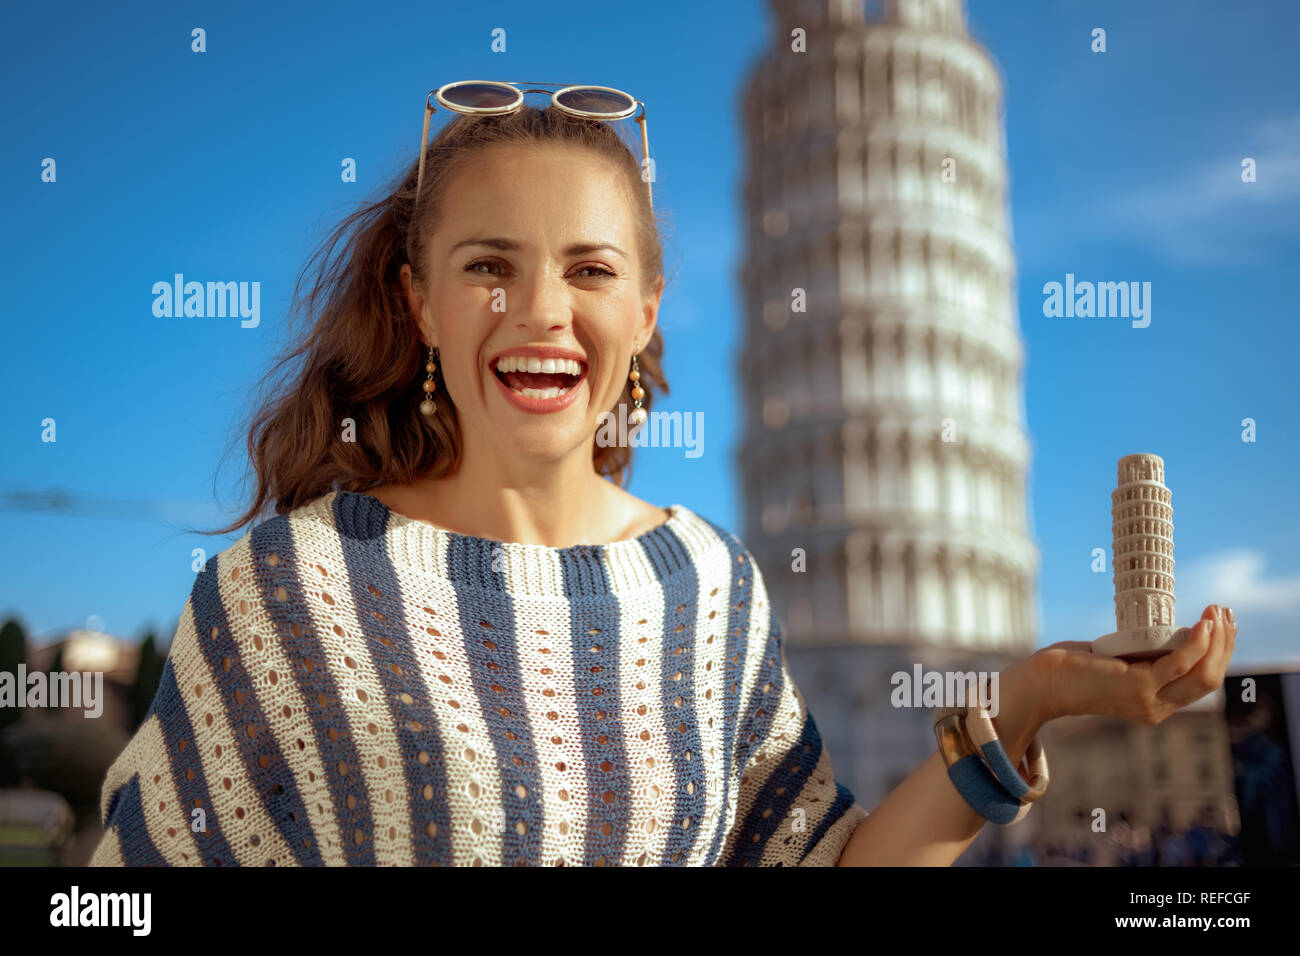 smiling elegant woman in striped blouse in the front of leaning tower in Pisa, Italy showing leaning tower of Pisa souvenir. сaucasian woman with brow Stock Photo